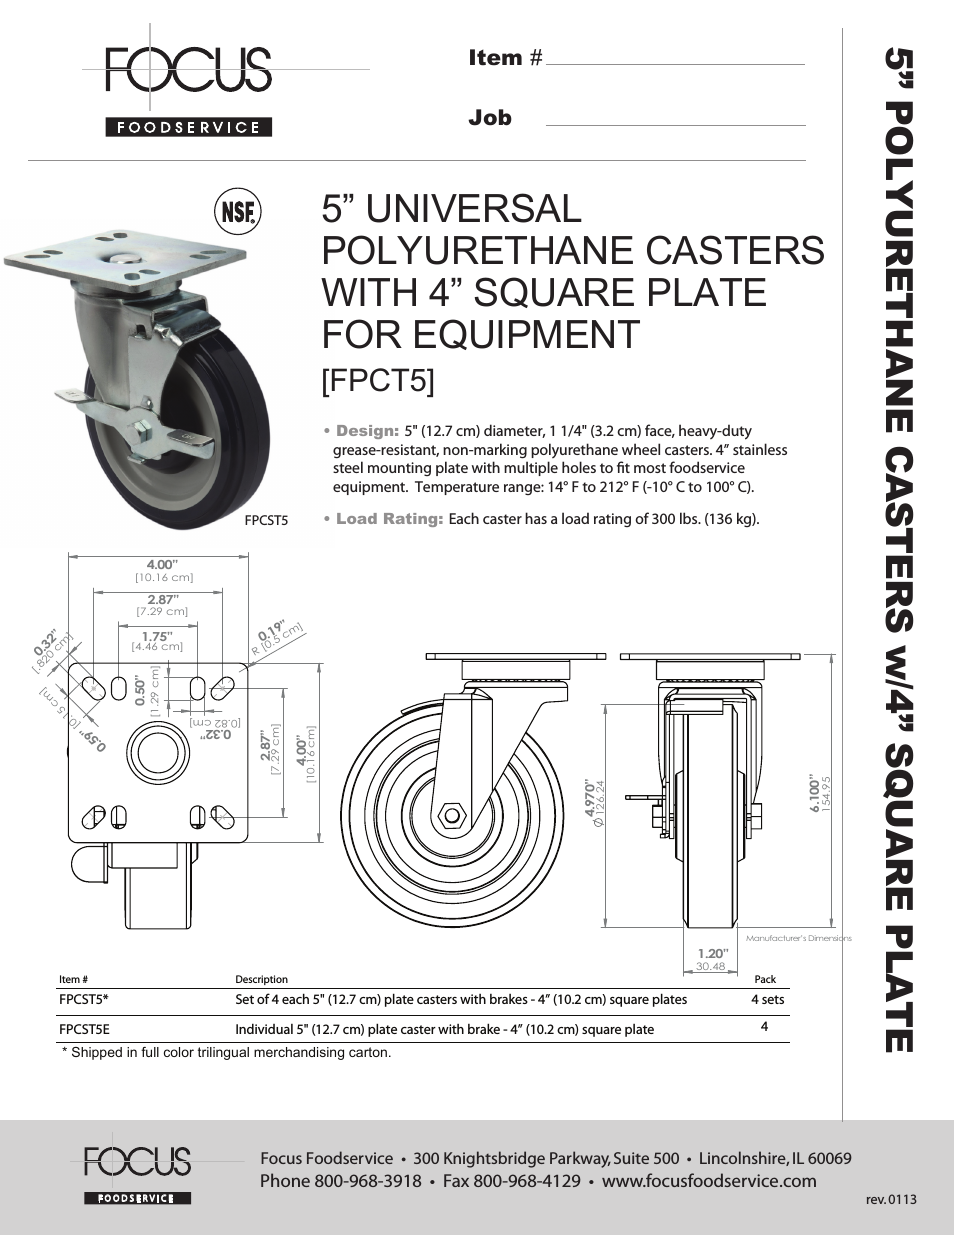 FPCT5 5” UNIVERSAL POLYURETHANE CASTERS WITH 4” SQUARE PLATE FOR EQUIPMENT - Specification Sheets